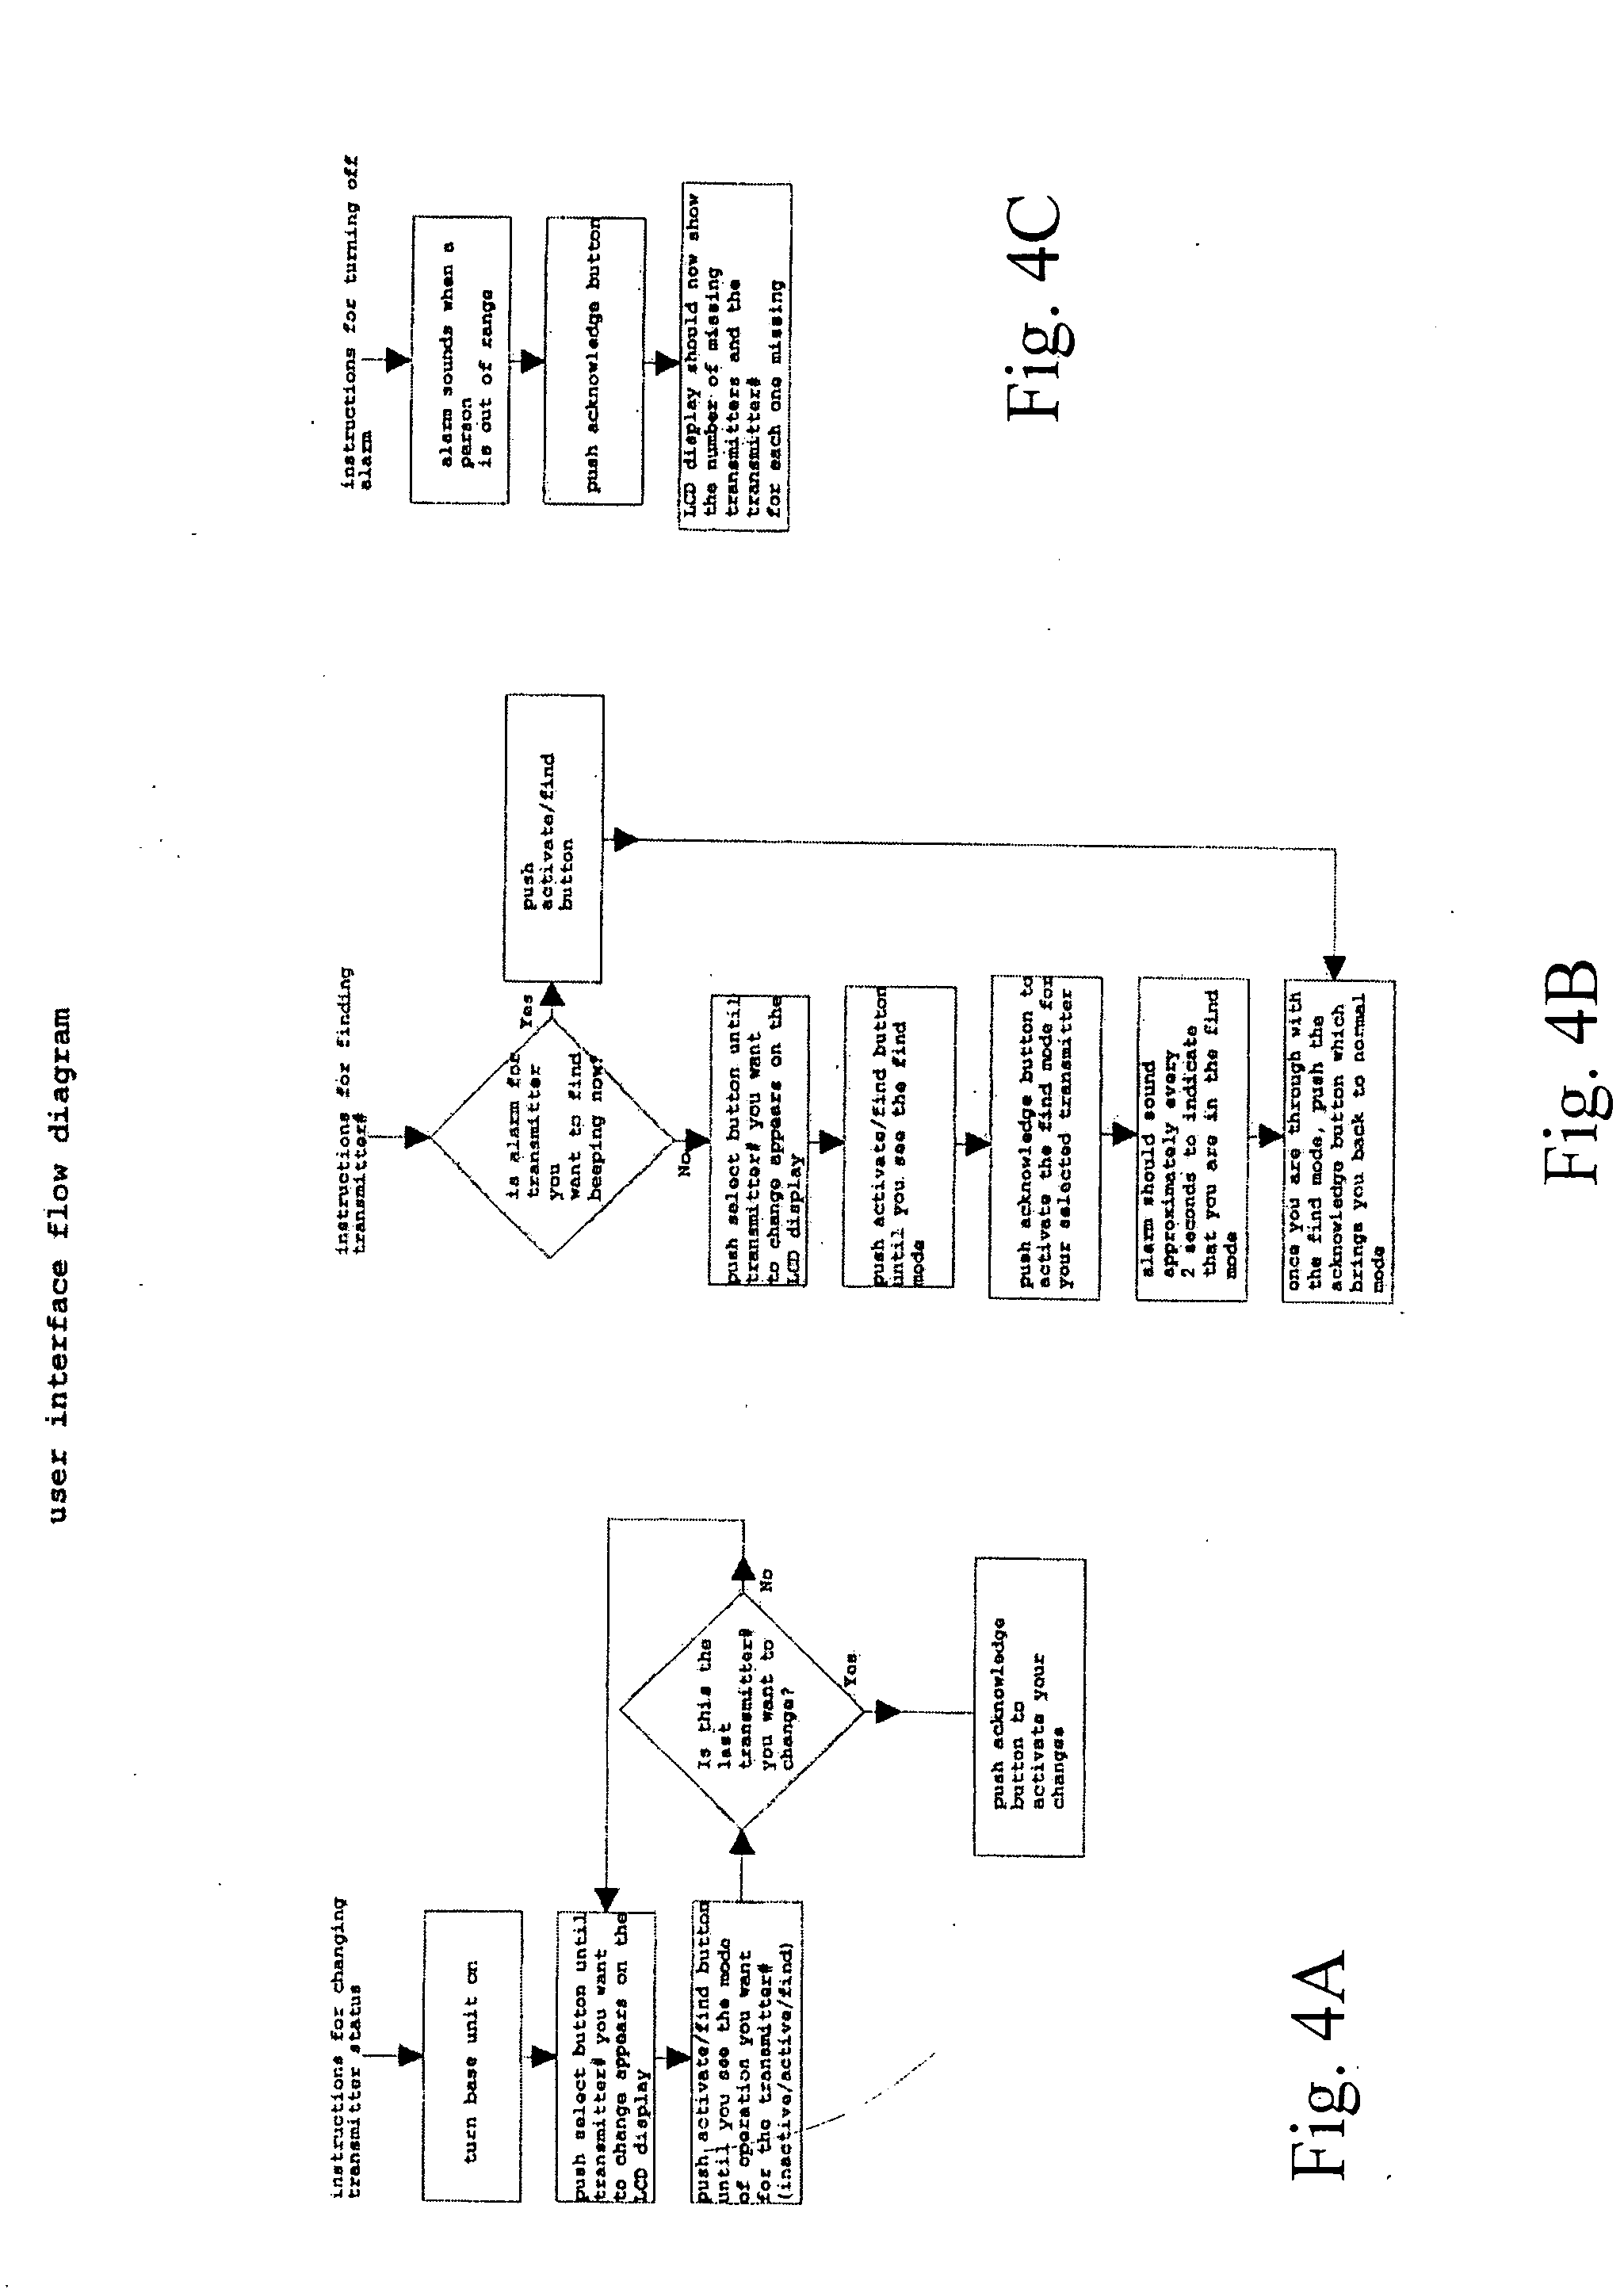 Wireless item location monitoring system and method